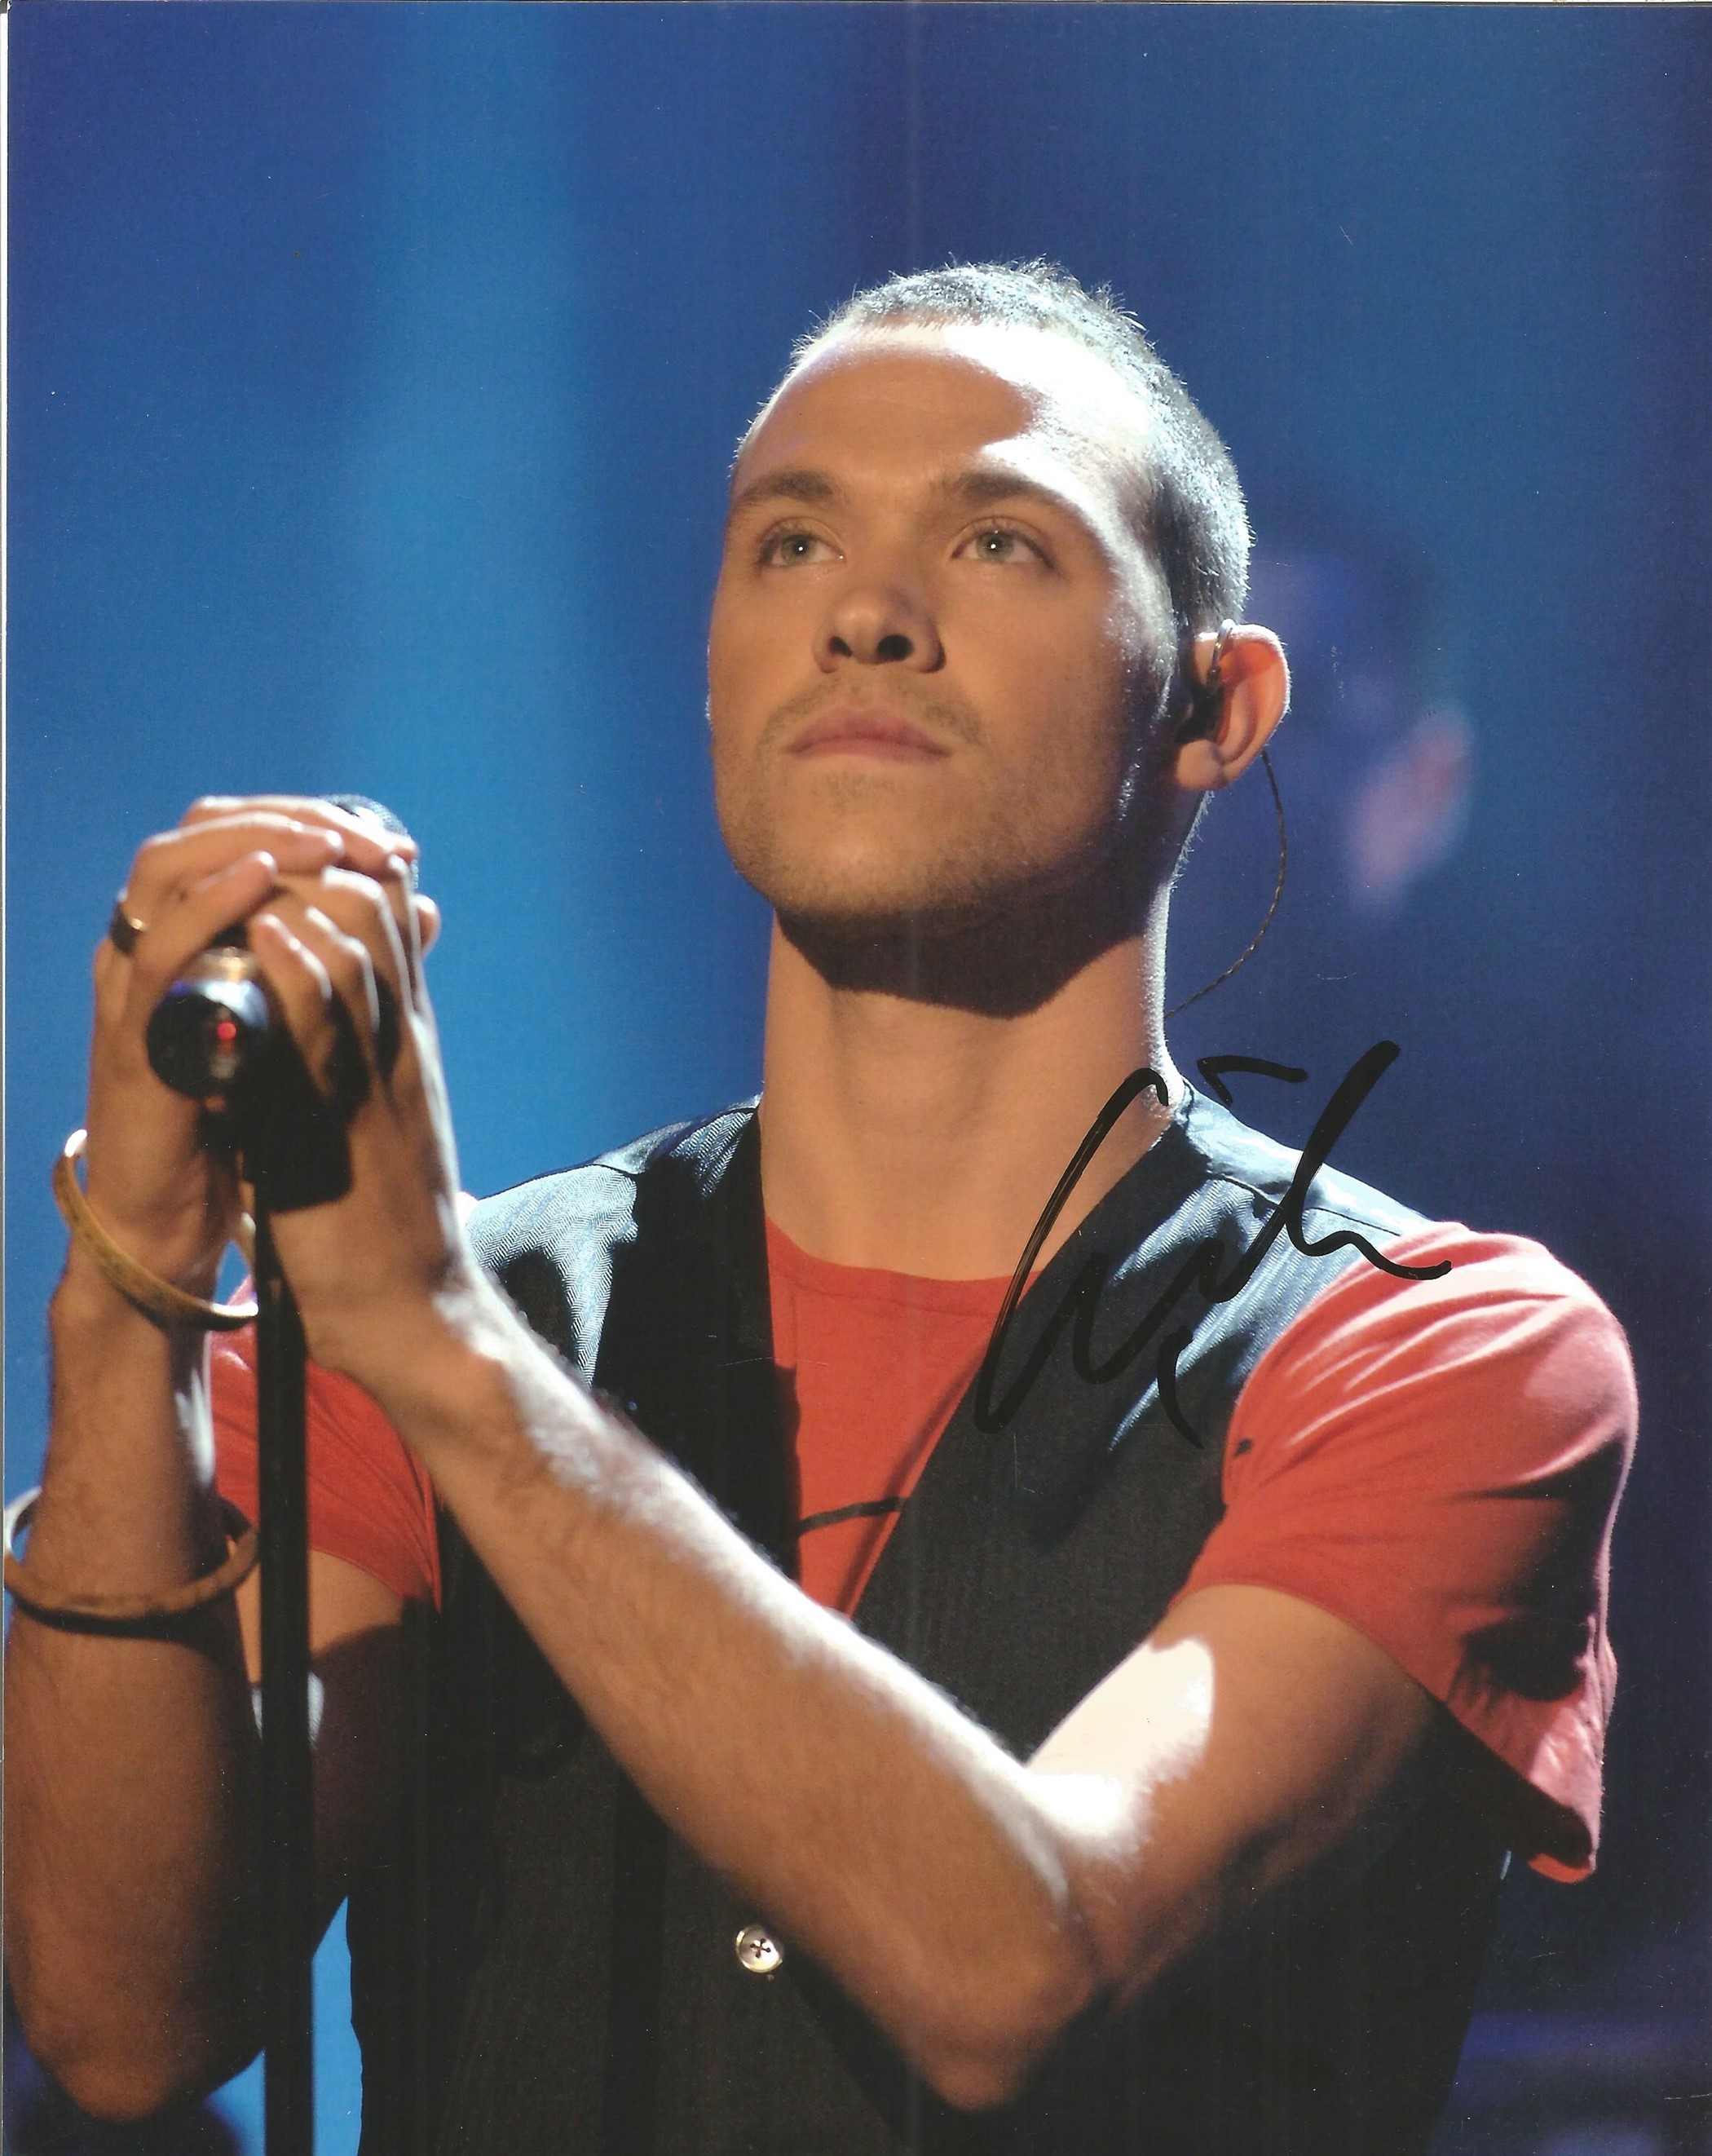 Will Young signed colour photo 10 x 8 inch. Good condition. All autographs come with a Certificate